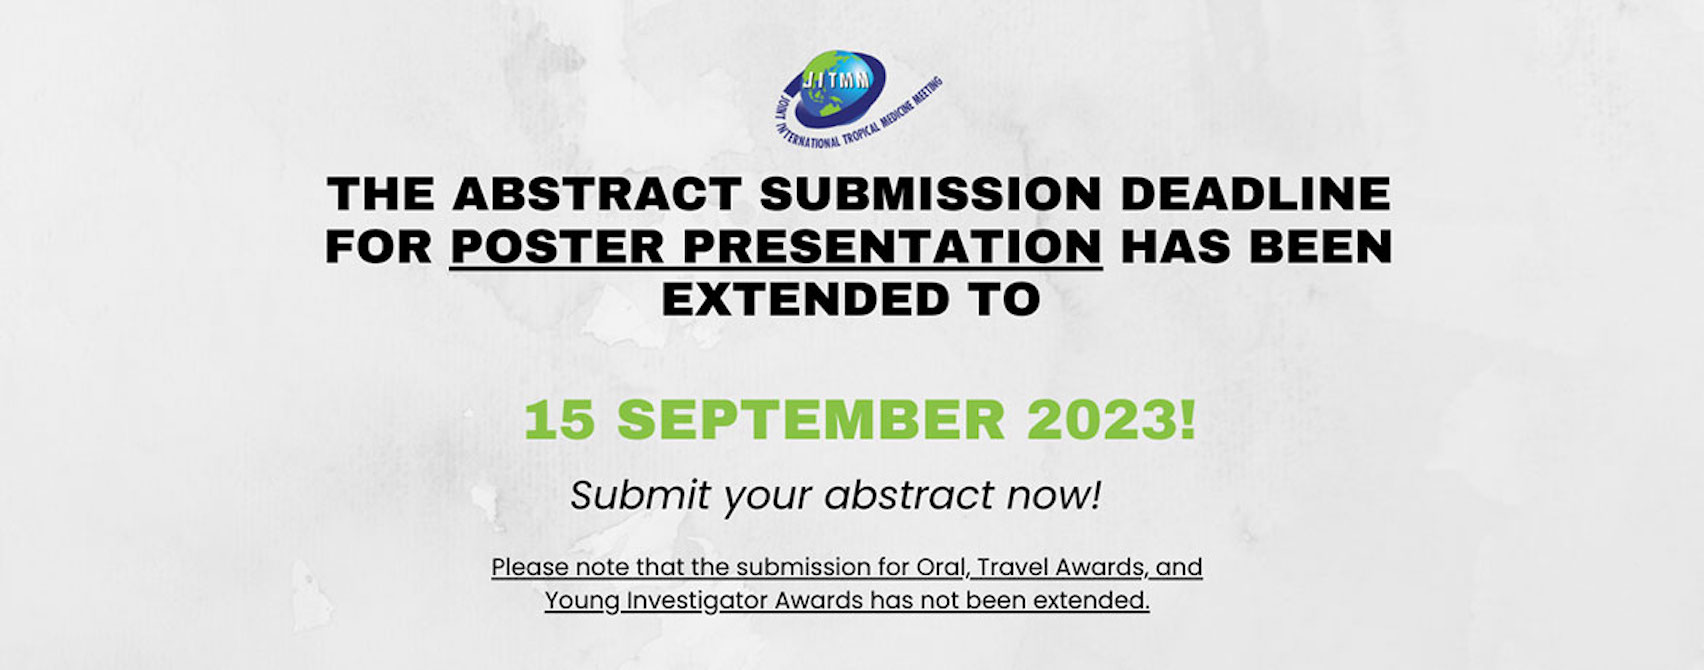 Registration and abstract open